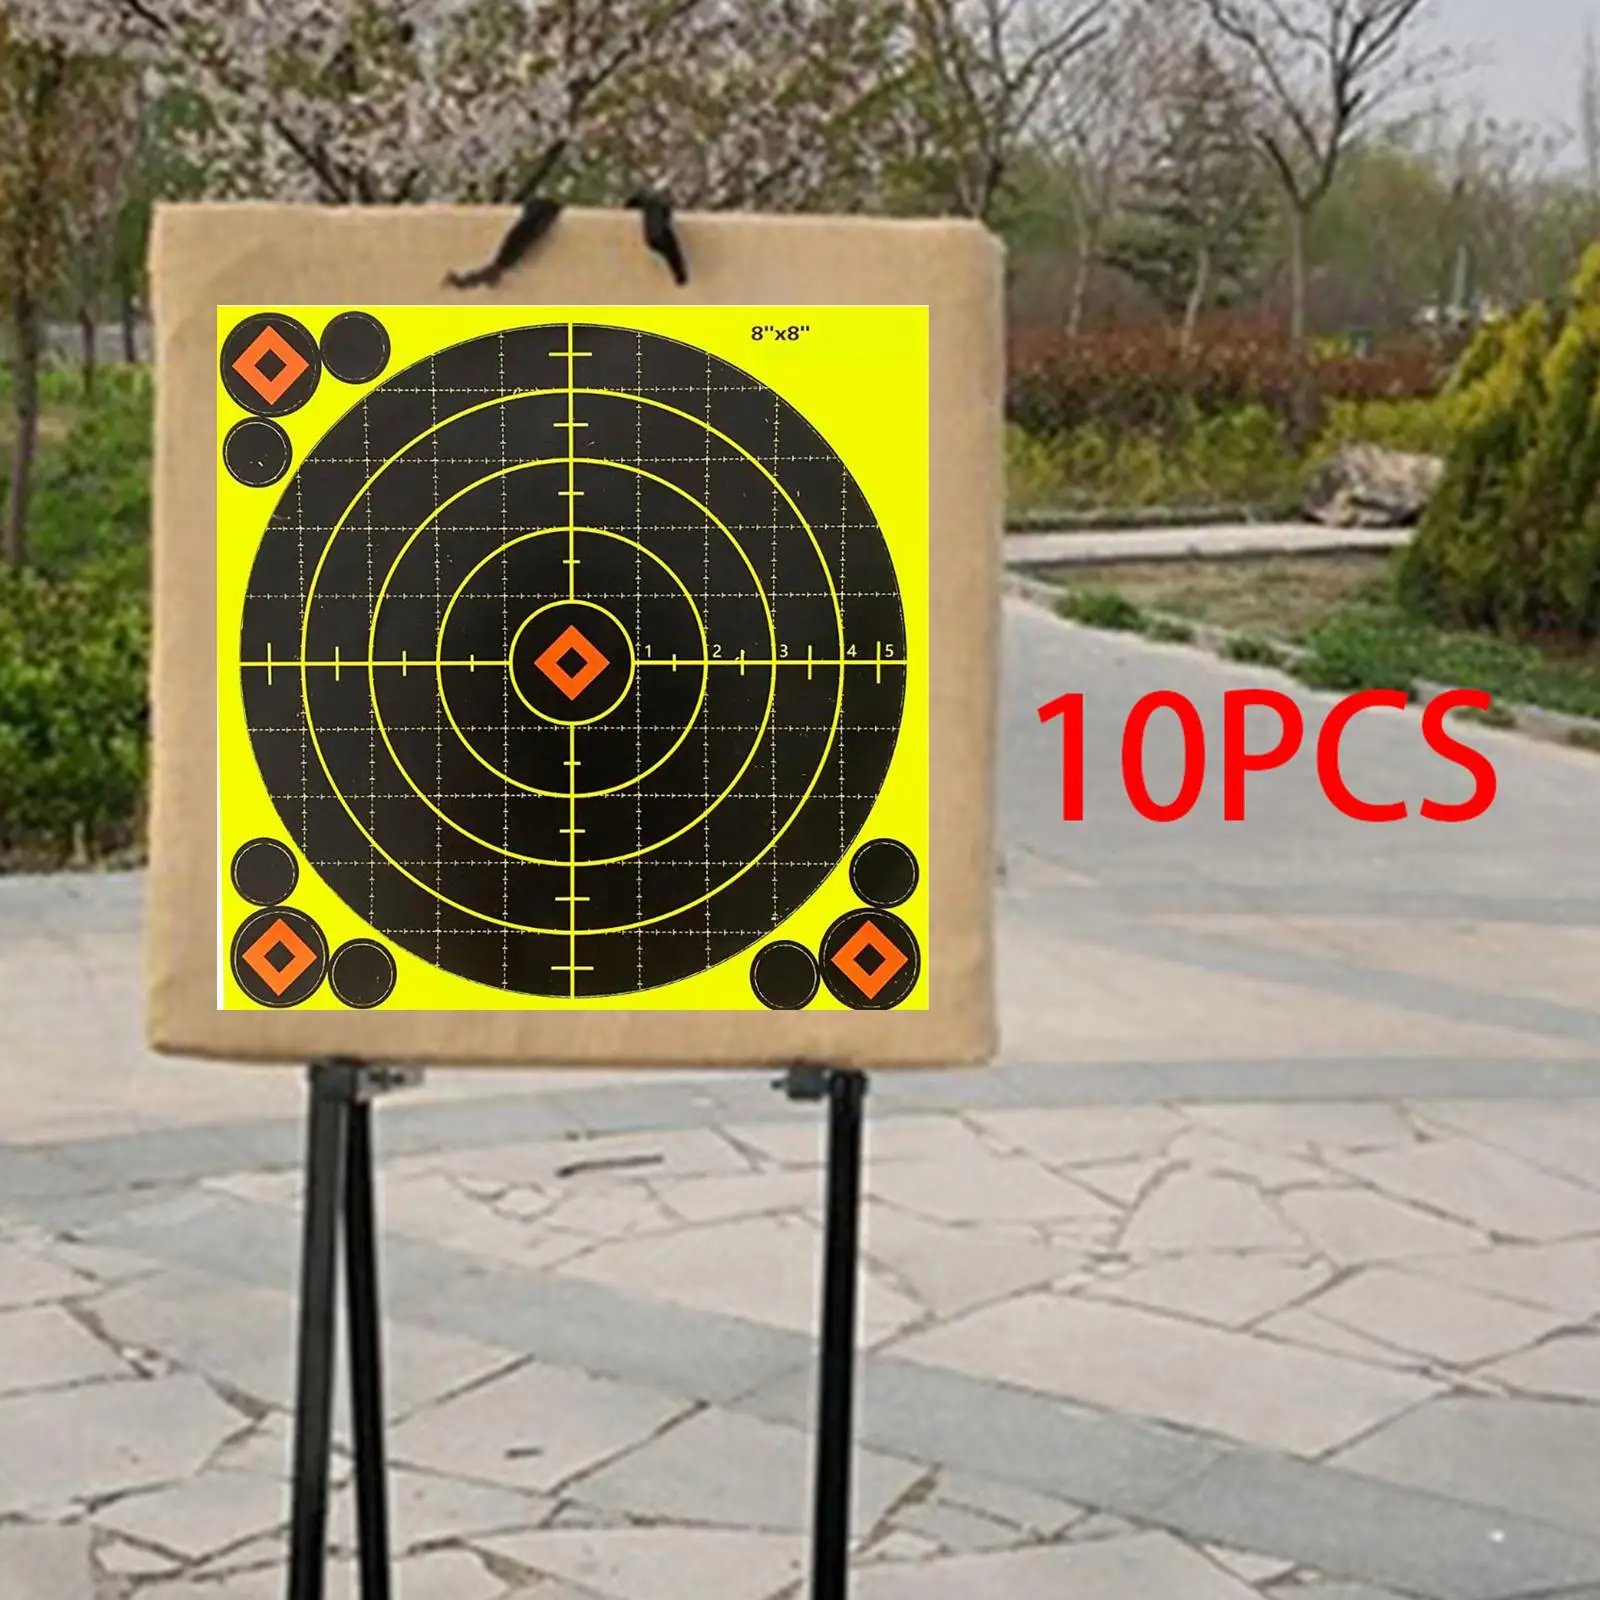 10x Splash Shooting Targets Paper Targets Stickers for Exercise Outdoor Practice